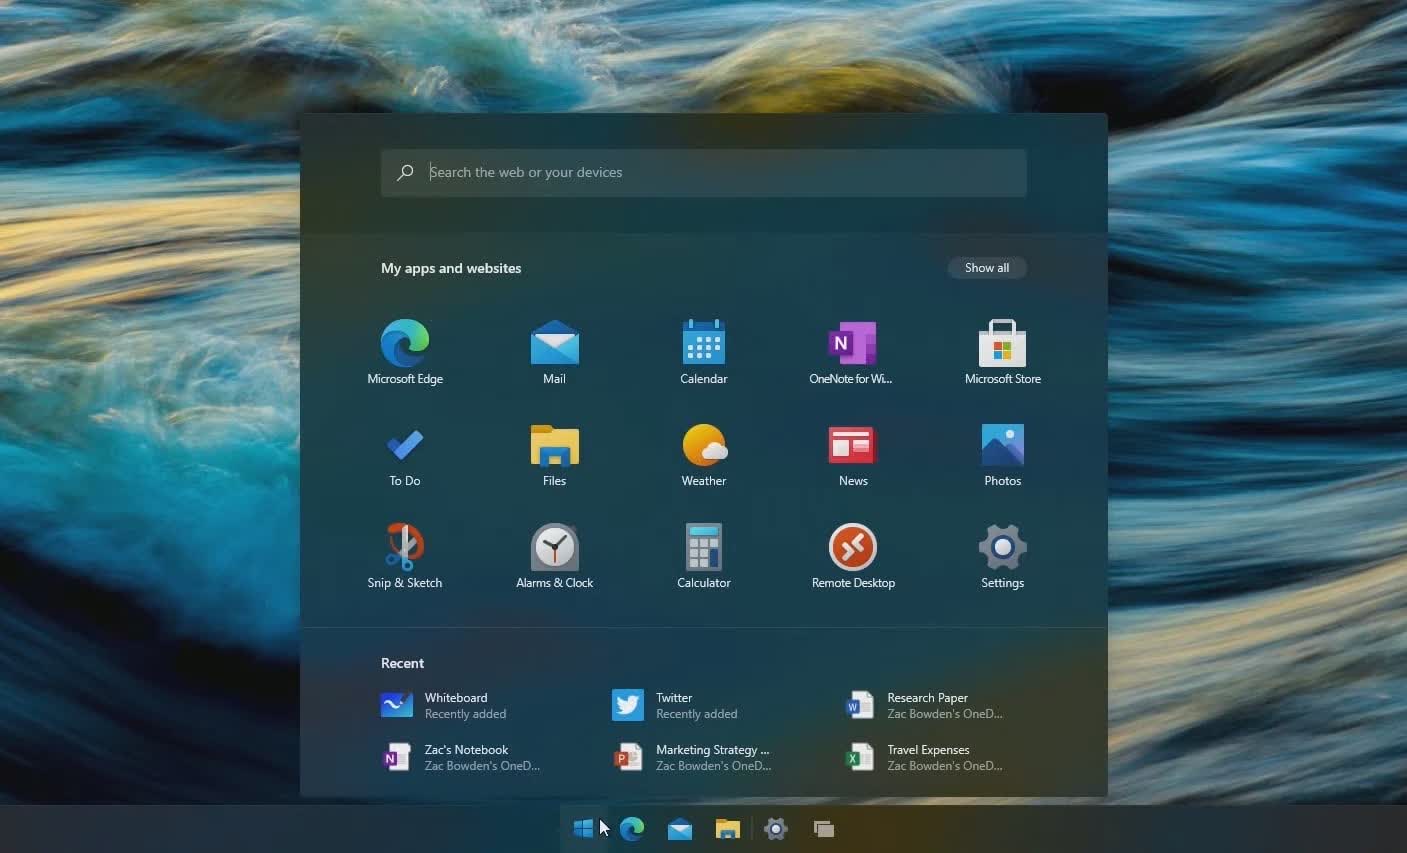 Future Windows 10 update will reportedly add floating Start Menu and rounded corners